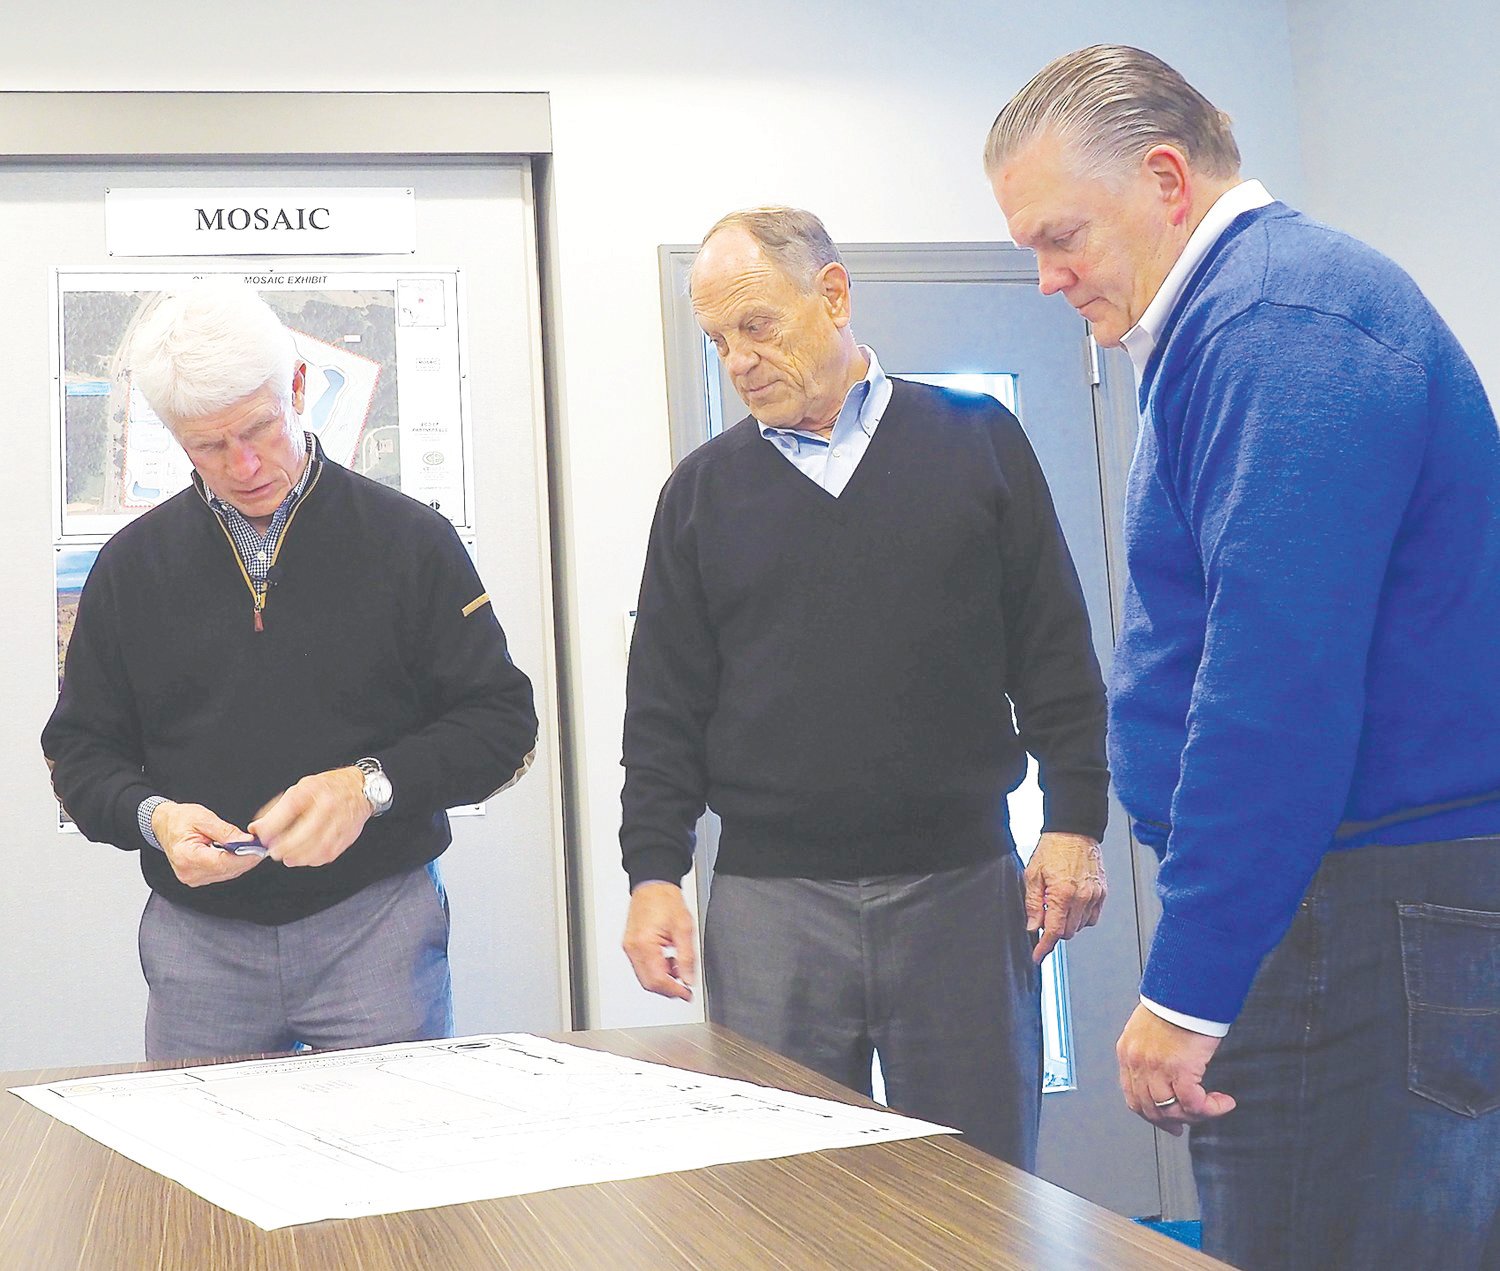 Chatham Park developers Julian 'Bubba' Rawl (left) and Tim Smith (center) examine plans for Mosaic with its developer, Kirk Bradley.